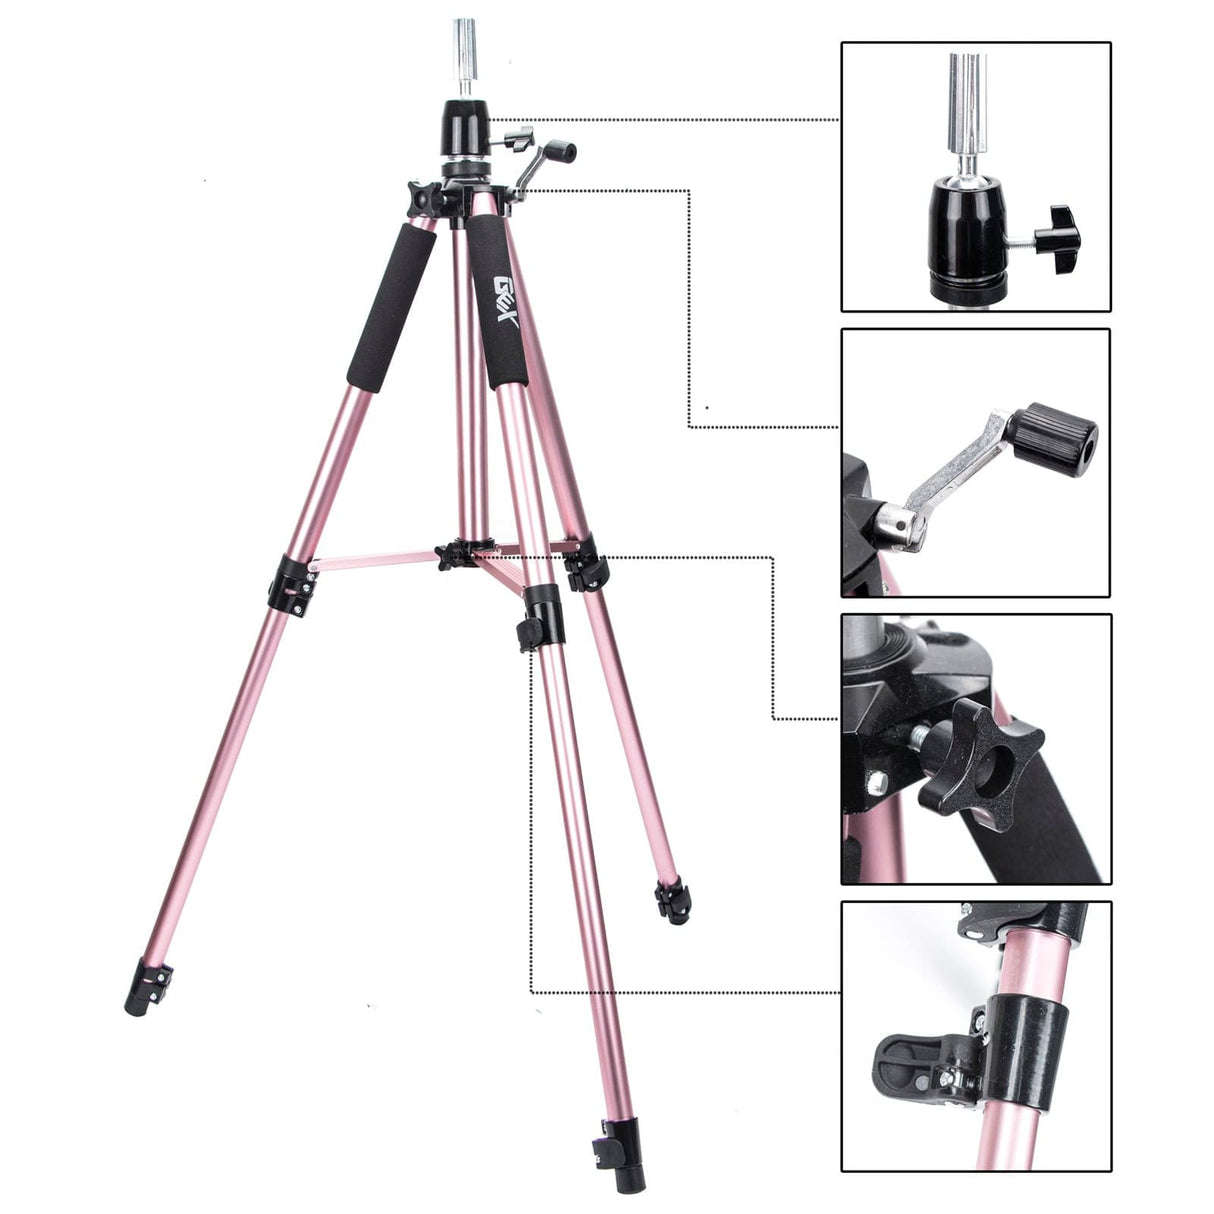 GEX Multifunction Training Mannequin Tripod / Camera Stand, Canvas